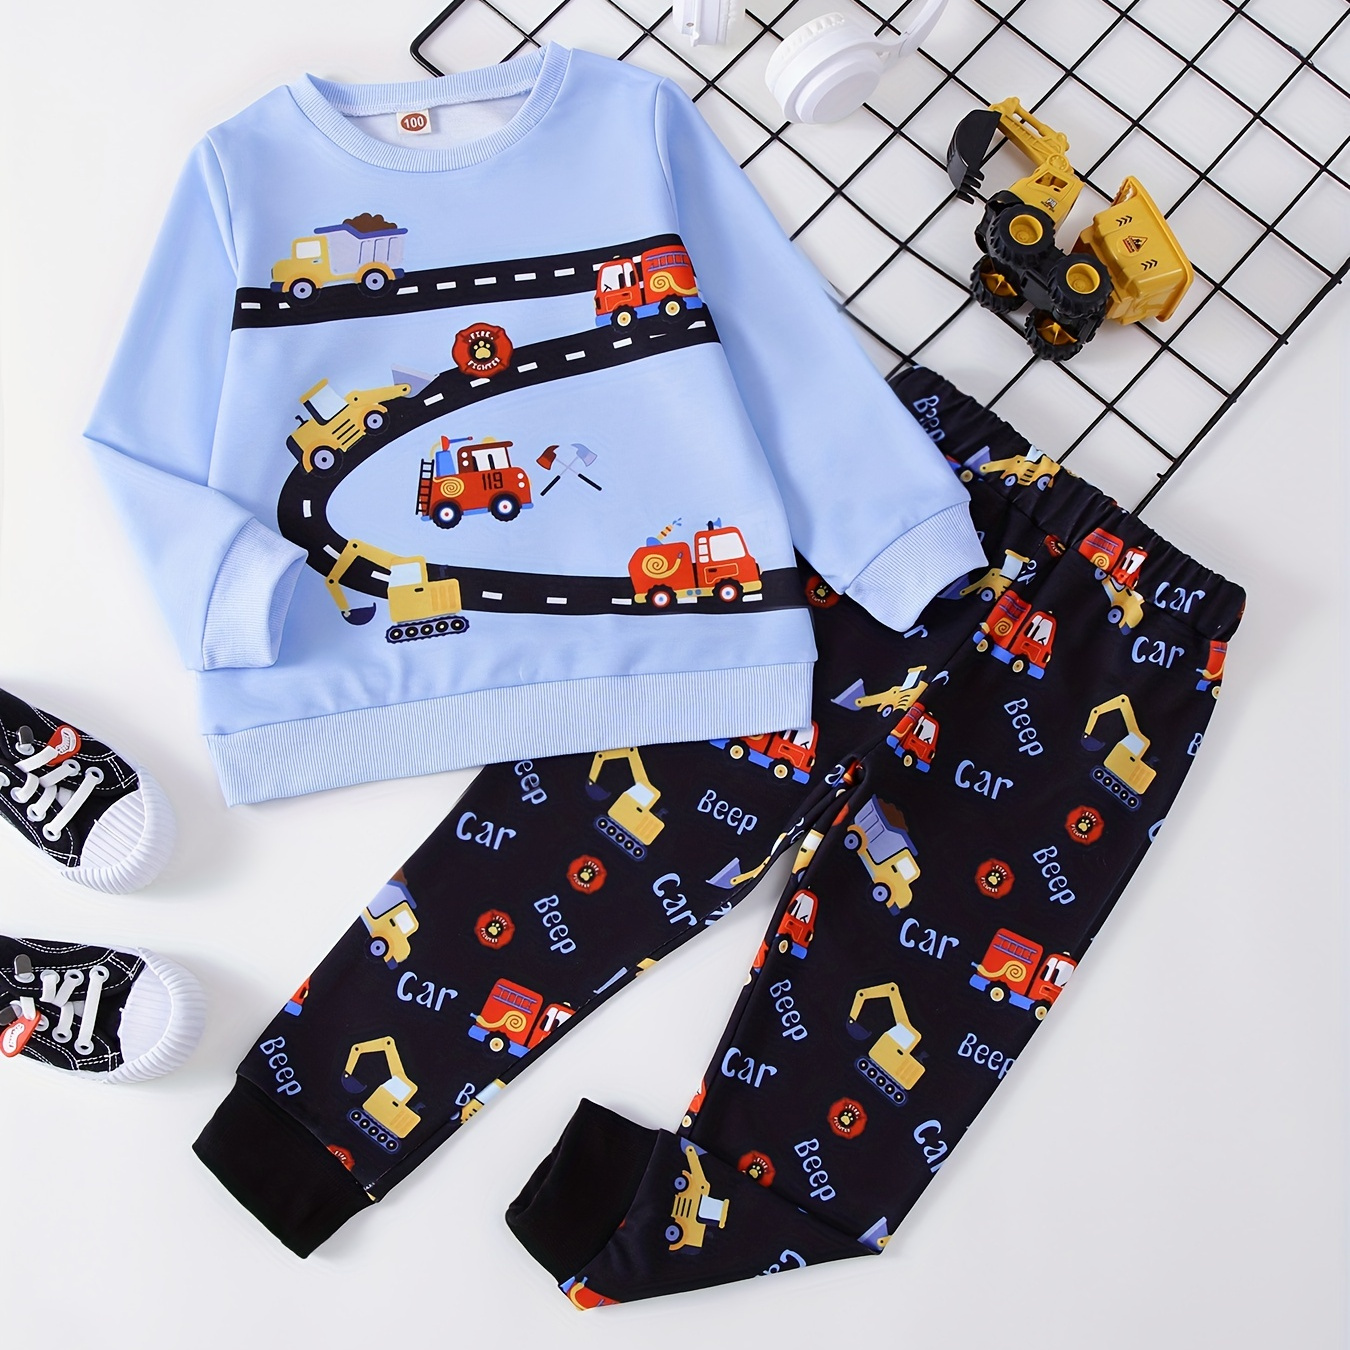 

2pcs Boy's Trendy Autumn Outfit, Sweatshirt & Sweatpants Set, Cartoon Engineering Car & Road Pattern Long Sleeve Top, Kid's Clothes For Spring Fall Winter, As Gift